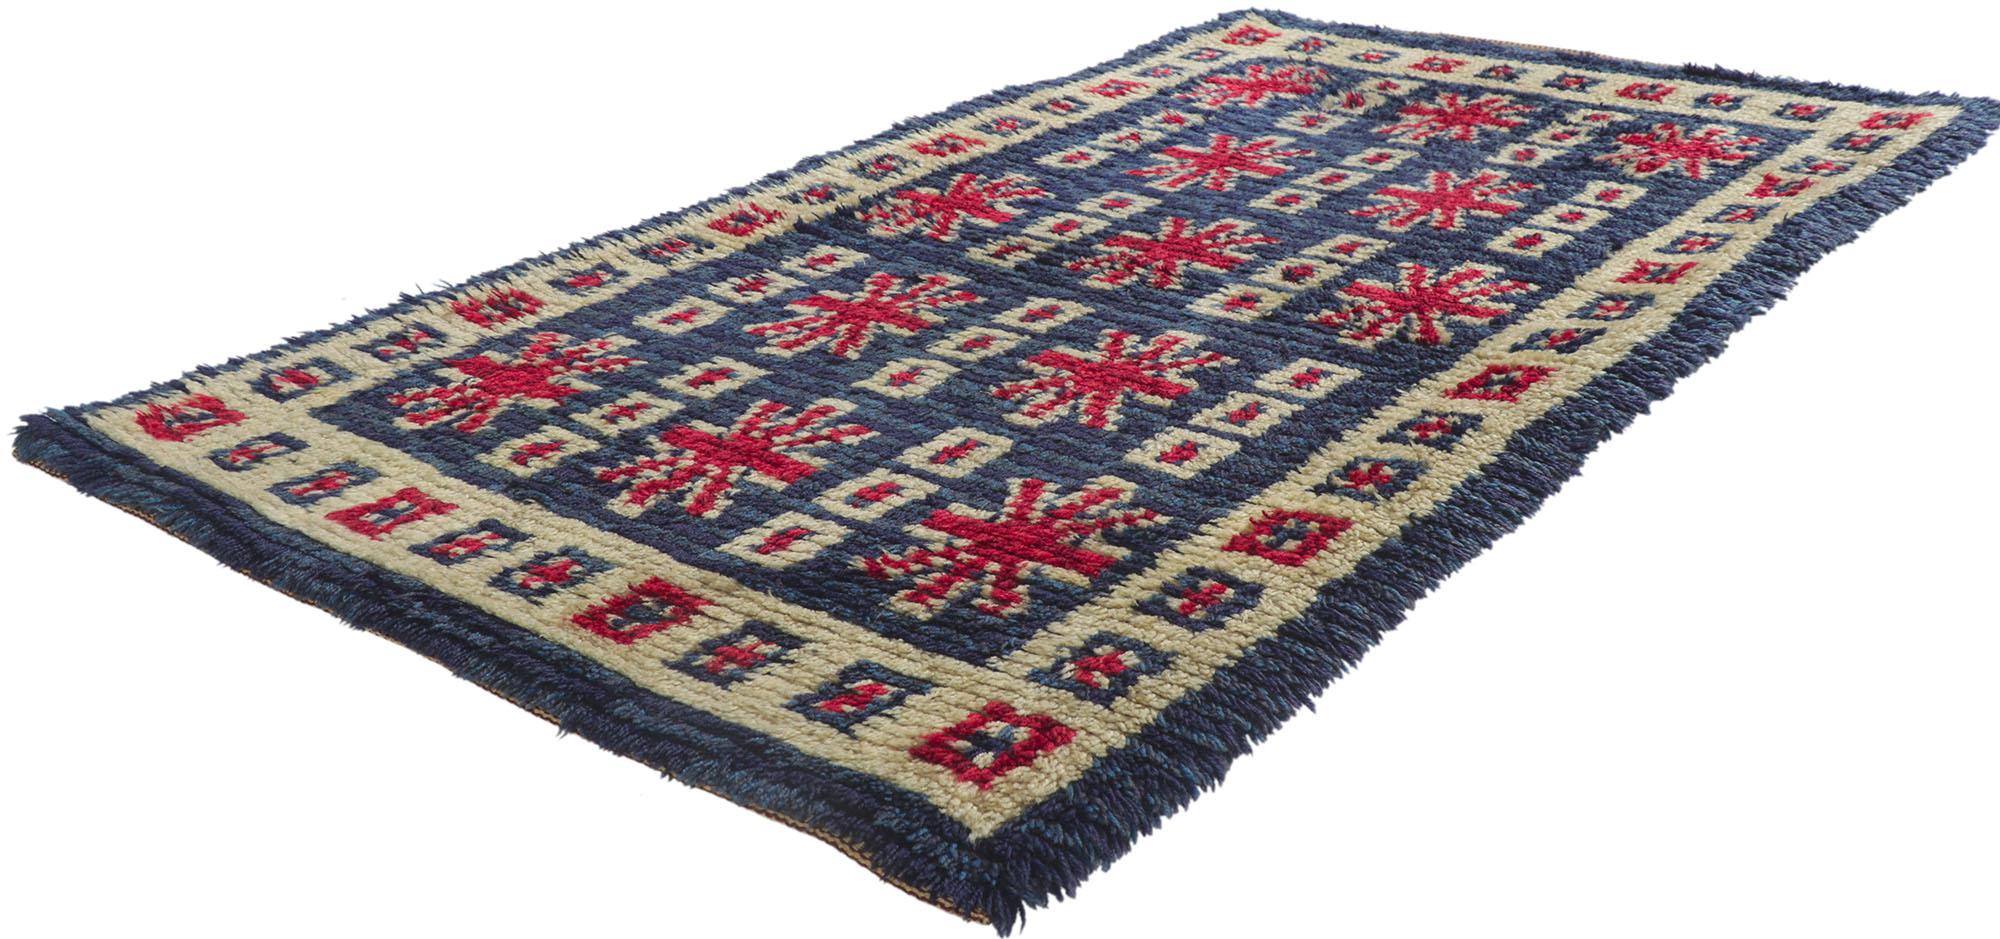 78270 Vintage Finnish Rya Ryijy rug with Cool Britannia style 03'01 x 05'07. Full of tiny details and a bold expressive design combined with Cool Britannia style, this hand-knotted wool vintage Finnish Ryijy Rya rug is a captivating vision of woven